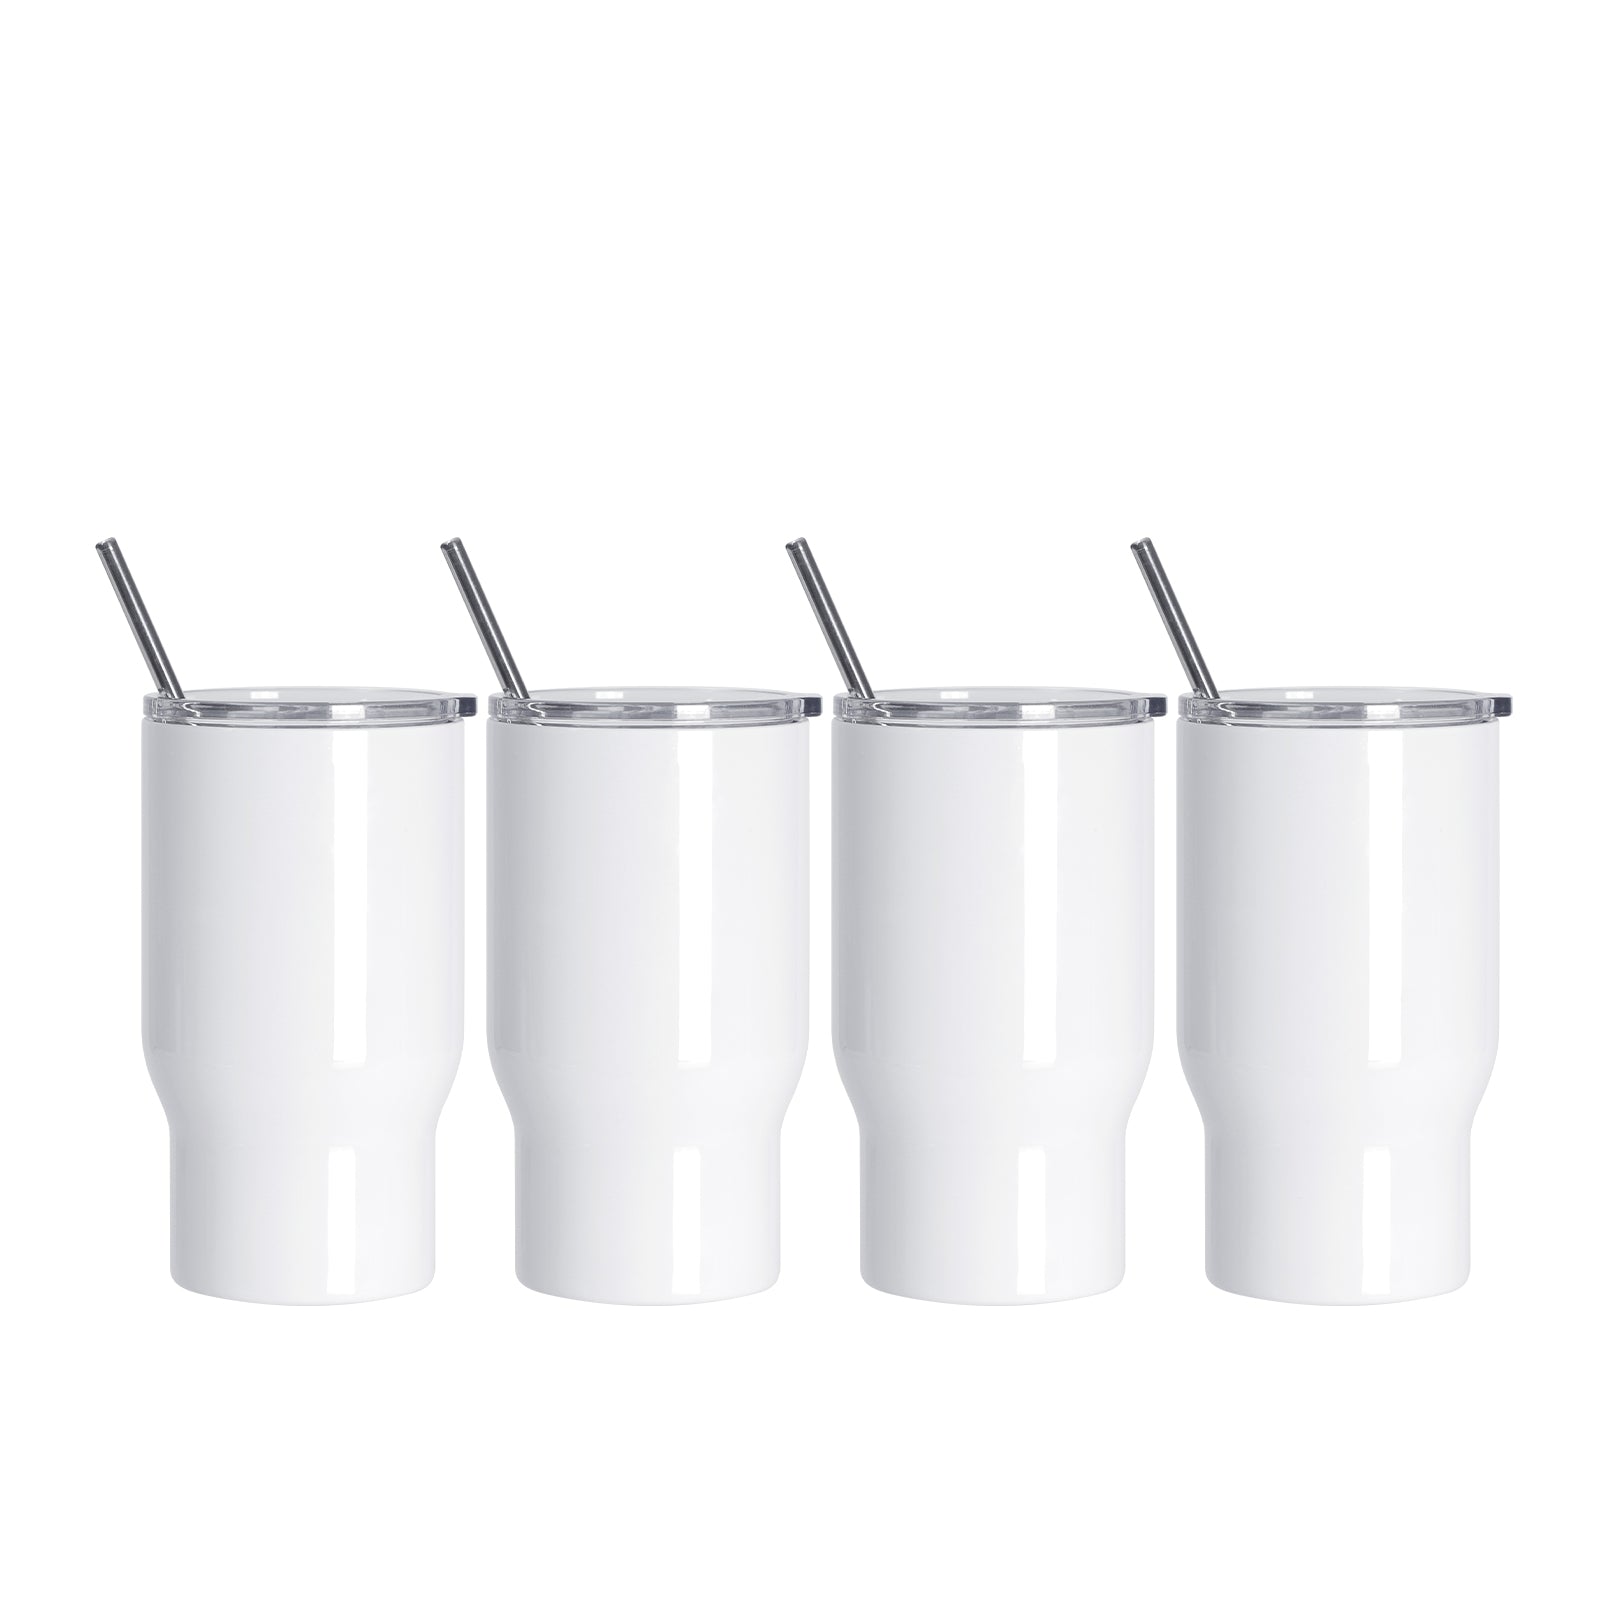 Sublimation Travel Tumblers White with Metal Straw and Leak-proof Slid